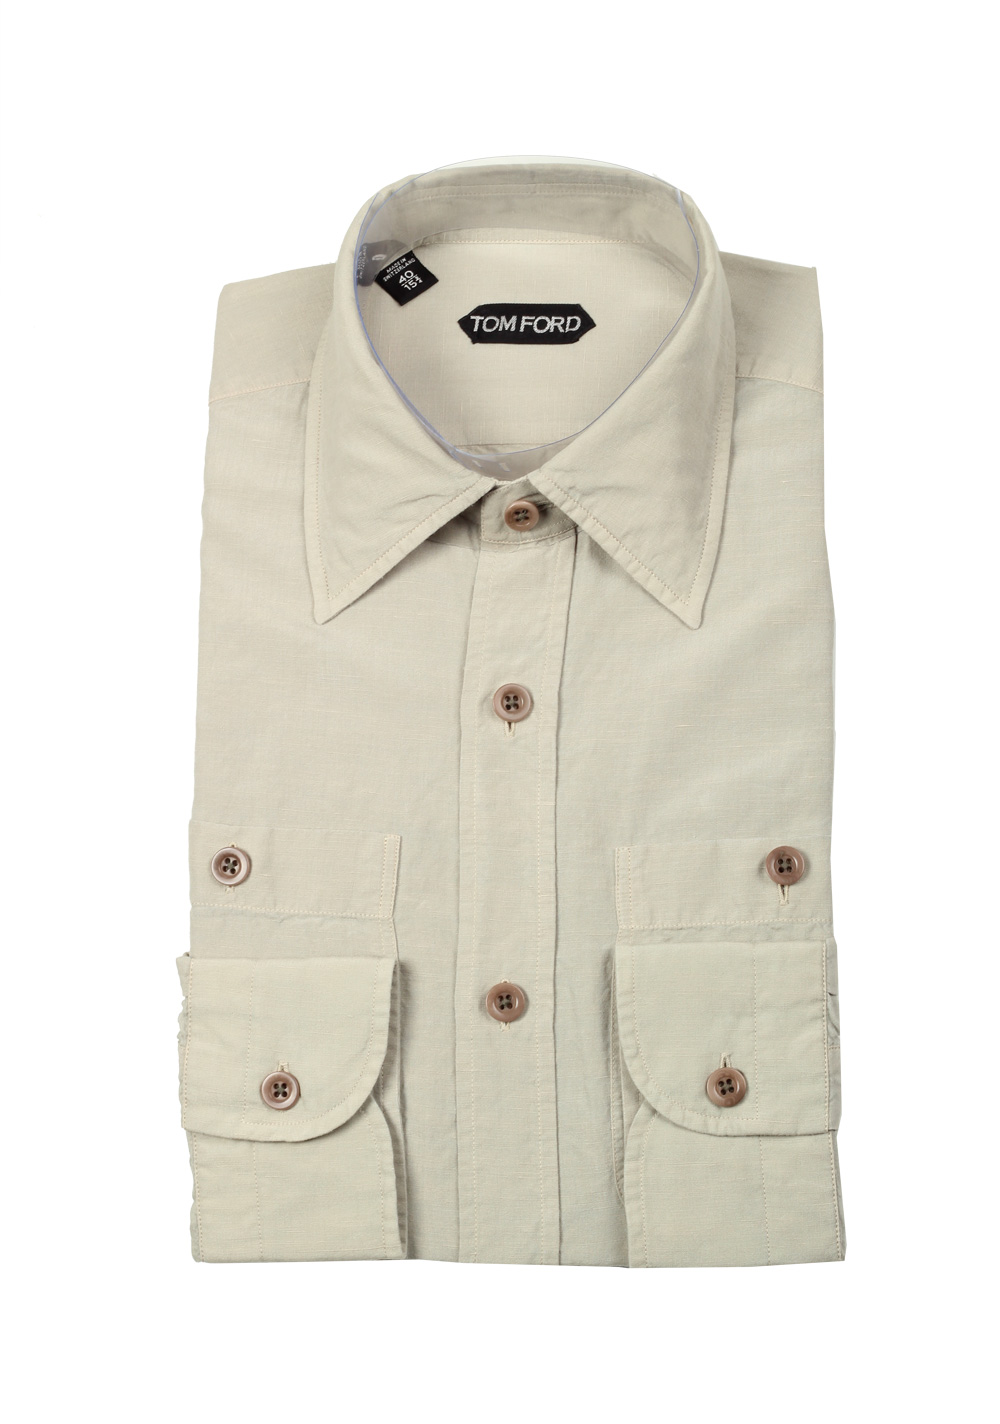 TOM FORD Solid Beige Casual Shirt Size 40 / 15,75 U.S. | Costume Limité